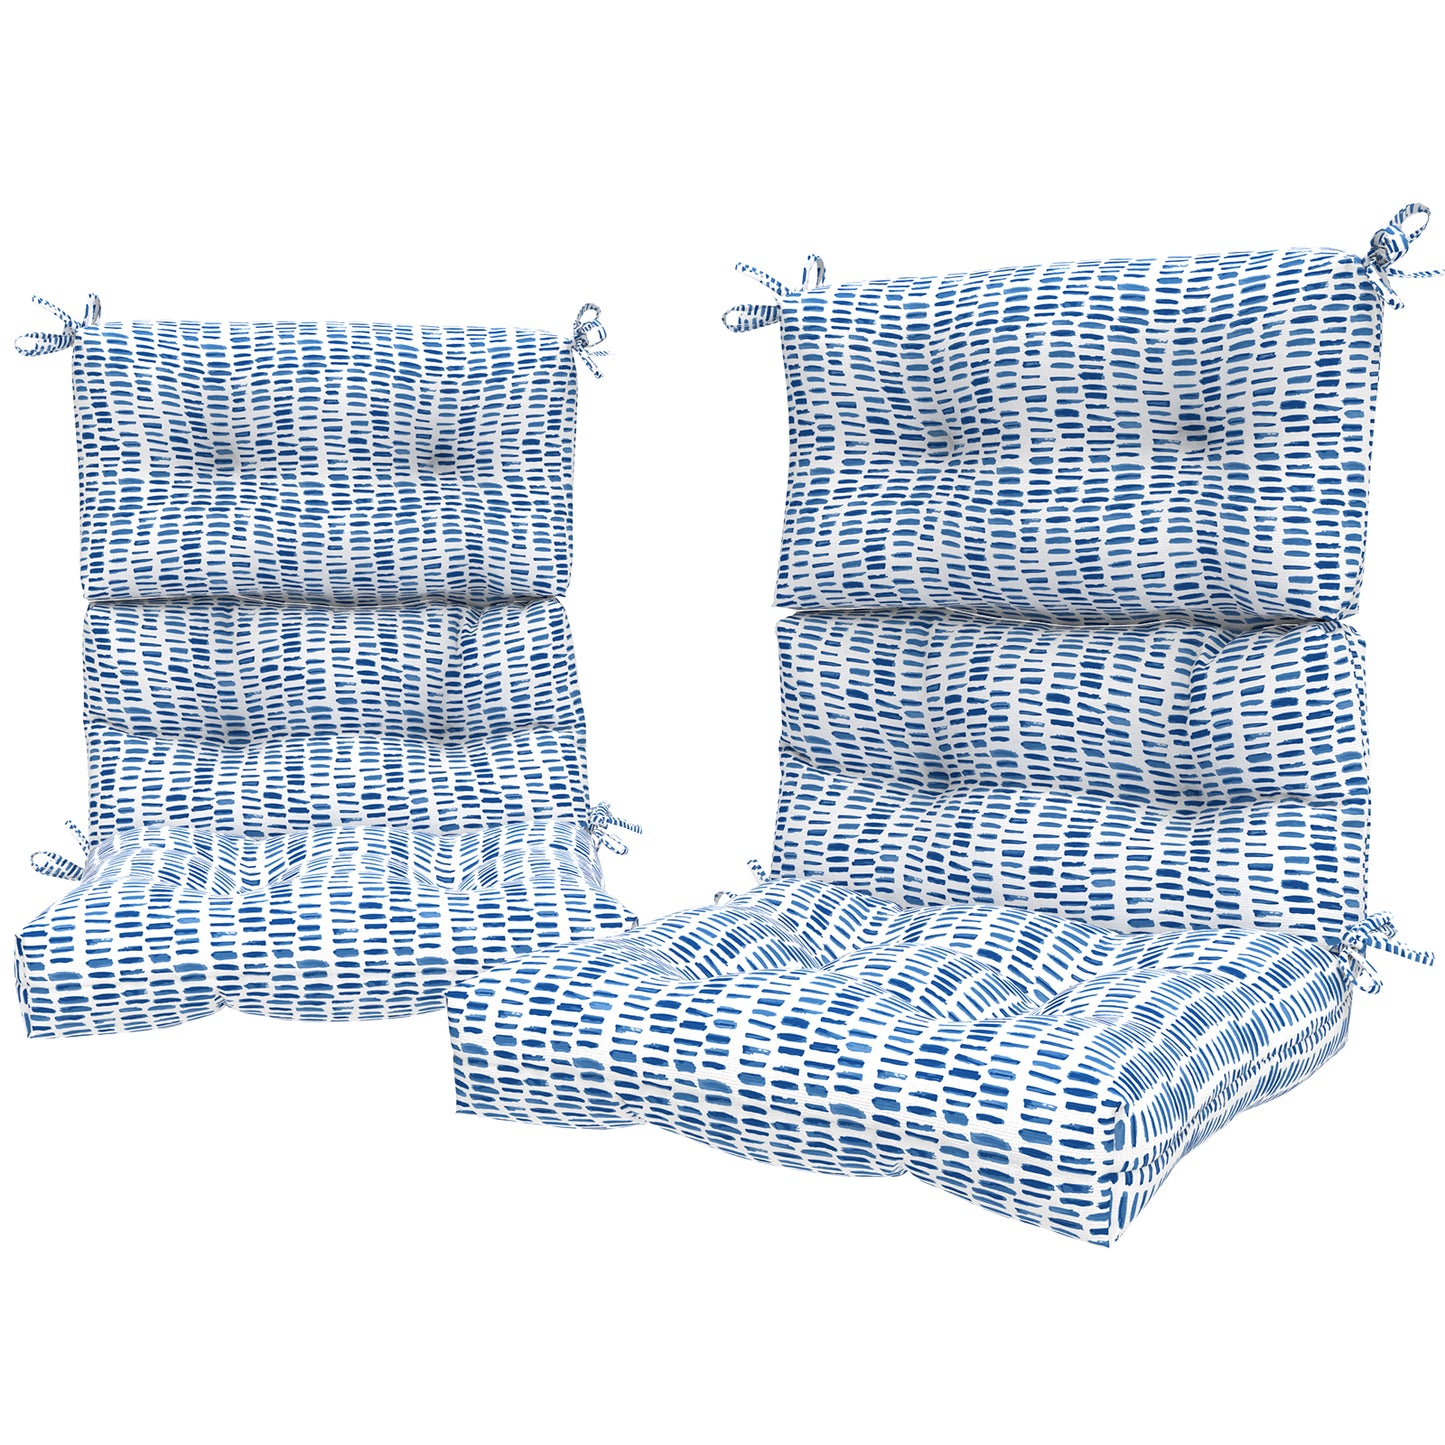 Melody Elephant Outdoor Tufted High Back Chair Cushions, Water Resistant Rocking Seat Chair Cushions 2 Pack, Adirondack Cushions for Patio Home Garden, 22" W x 20" D, Pebble Blue